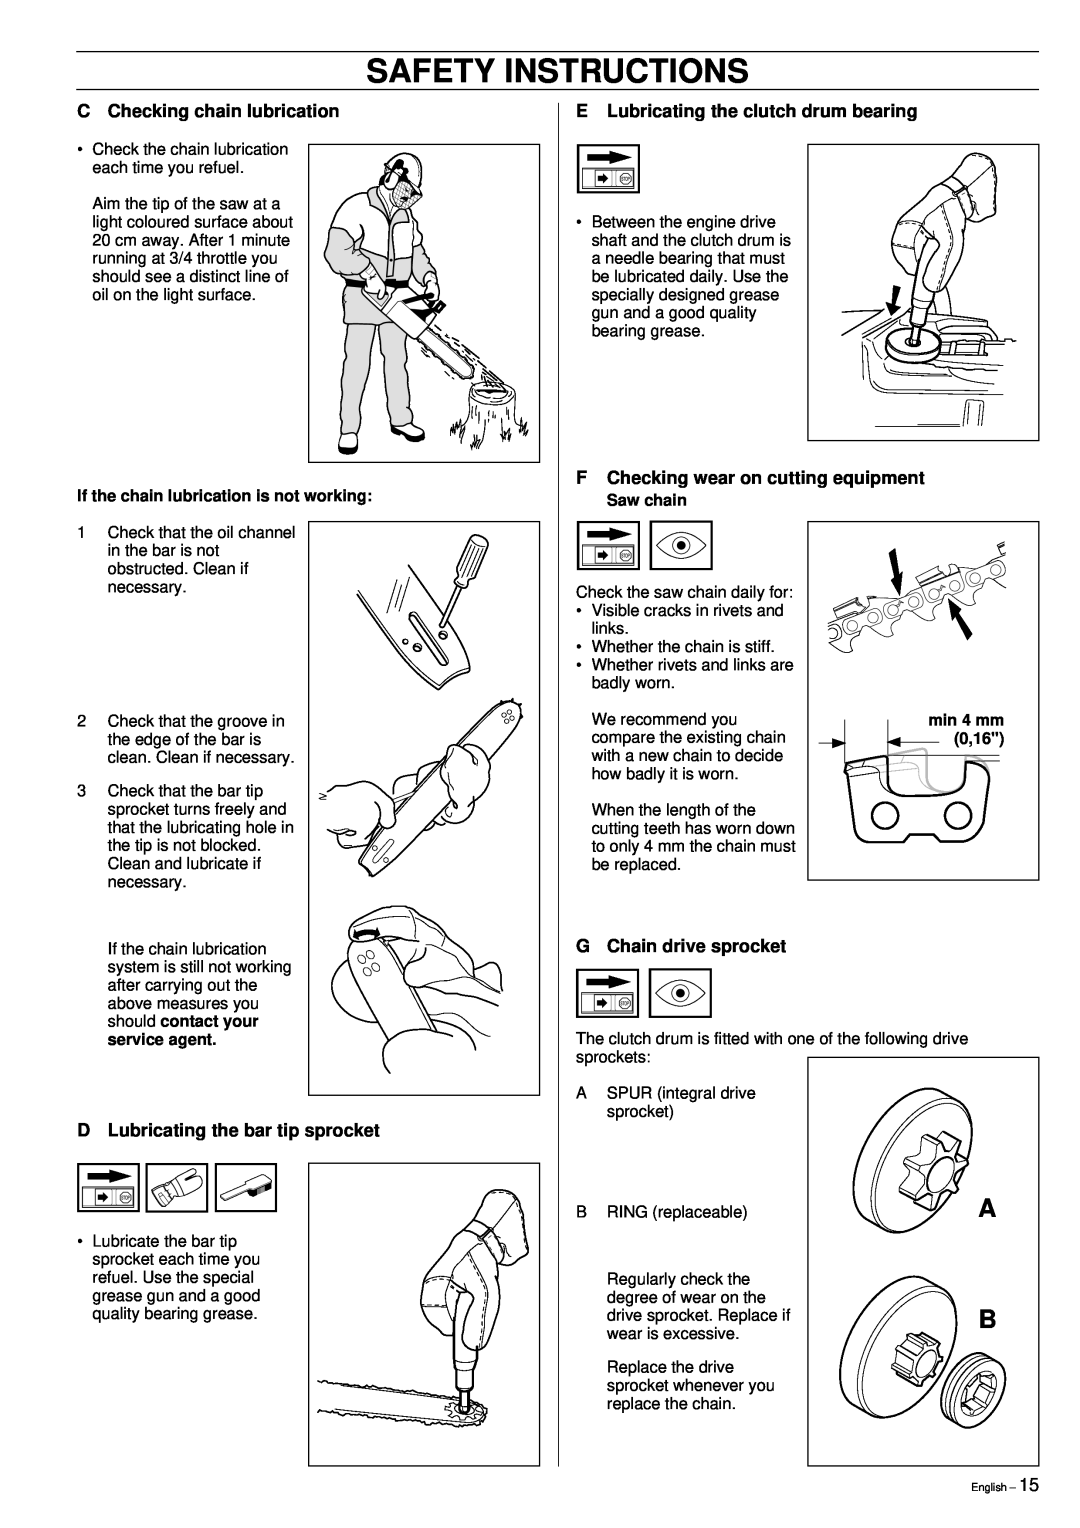 Husqvarna 395XP manual Safety Instructions, C Checking chain lubrication, E Lubricating the clutch drum bearing 